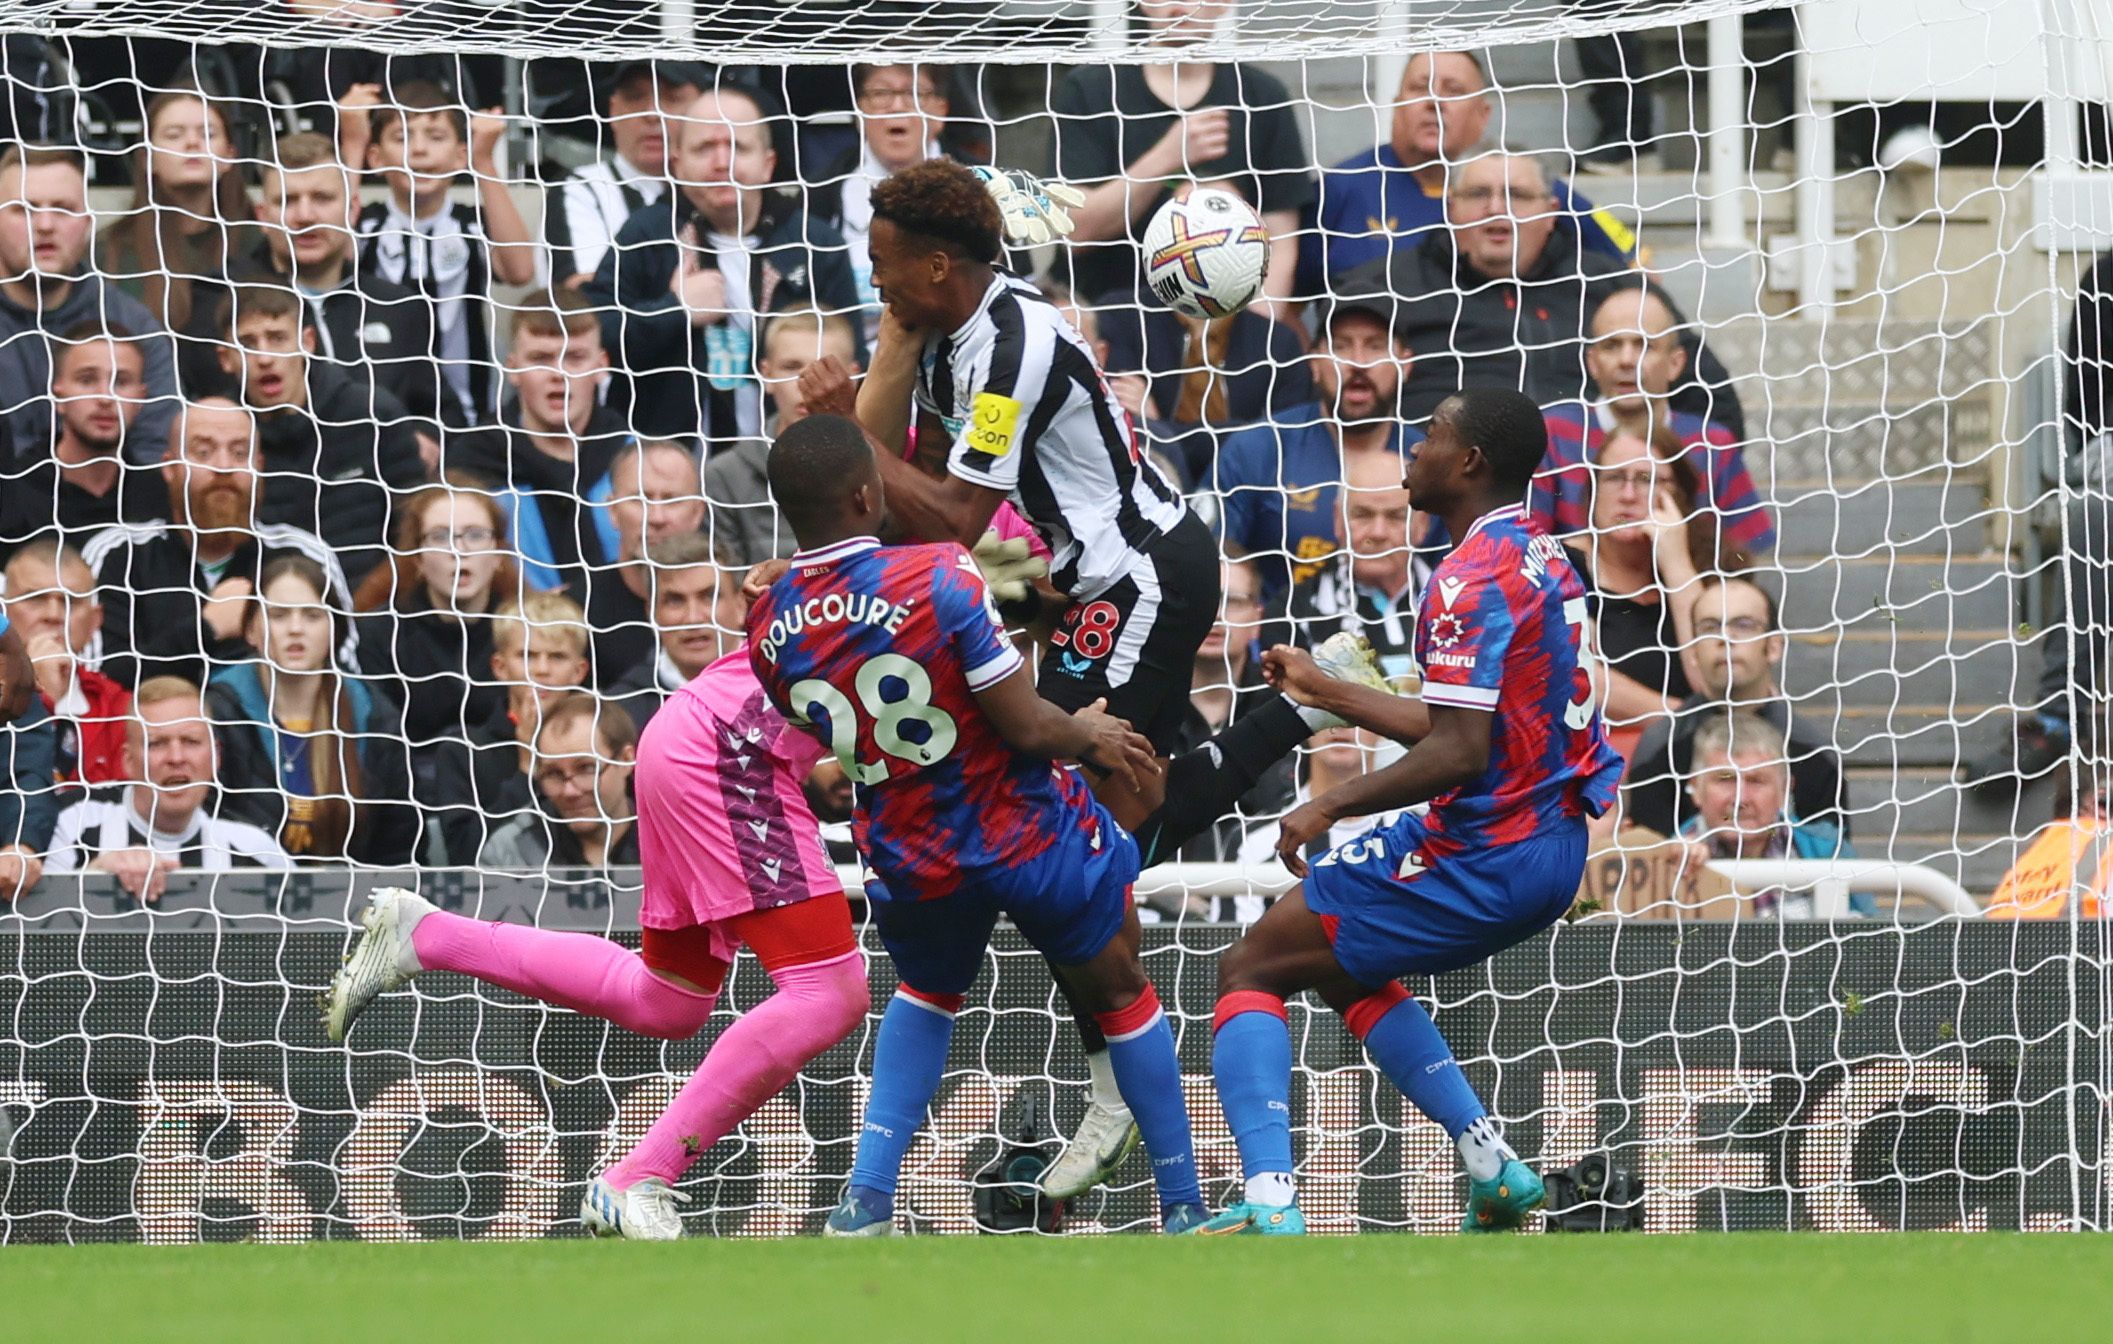 Newcastle: Paul Robinson backs PGMOL decision after Magpies incident -Newcastle United News